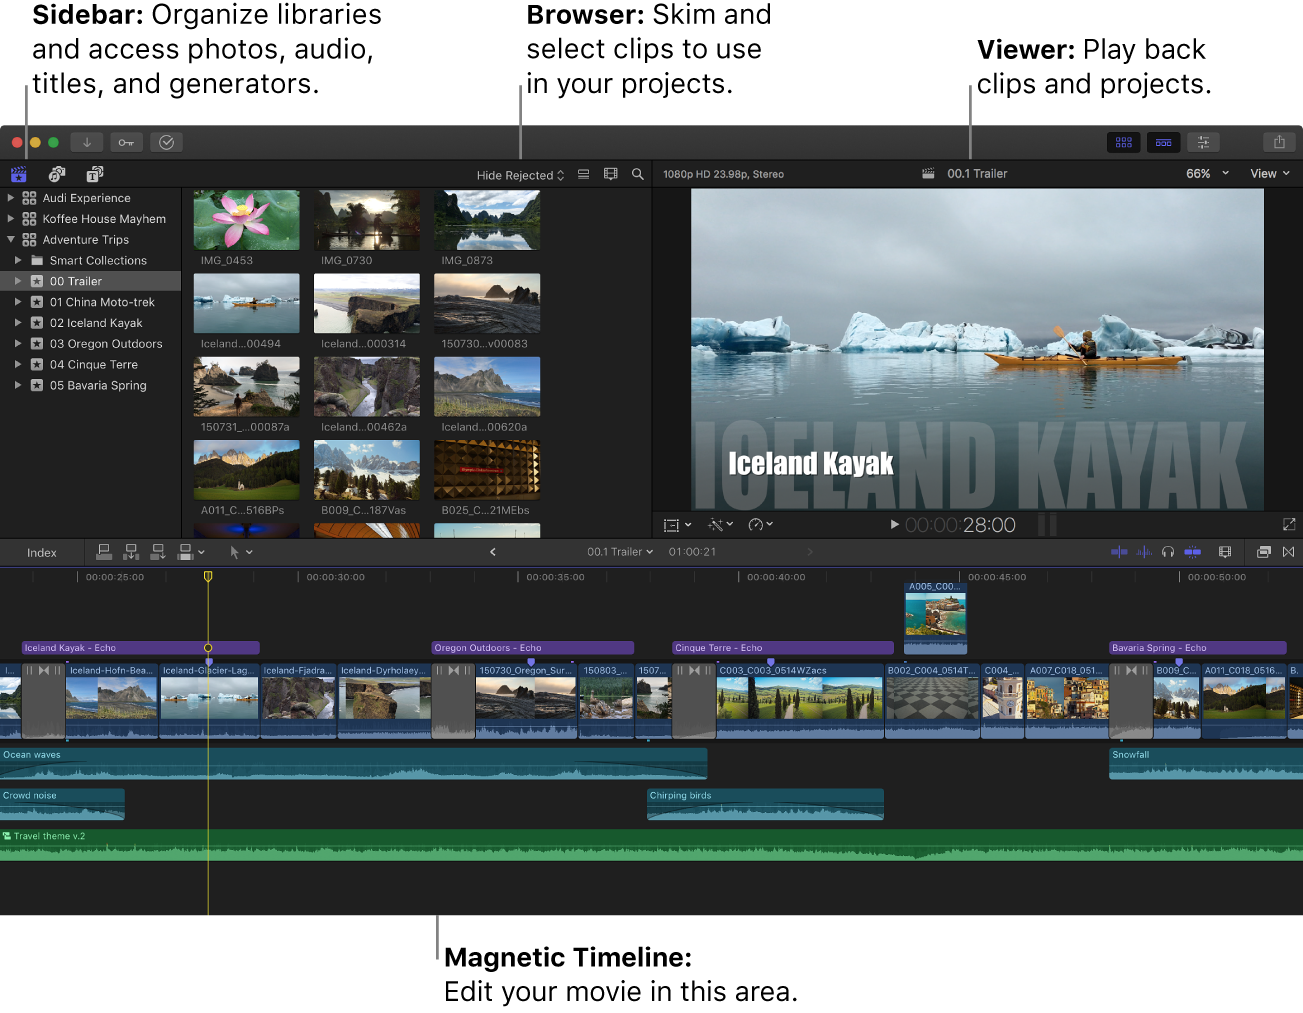 The Final Cut Pro window showing the Libraries sidebar, the browser, the viewer, and the timeline